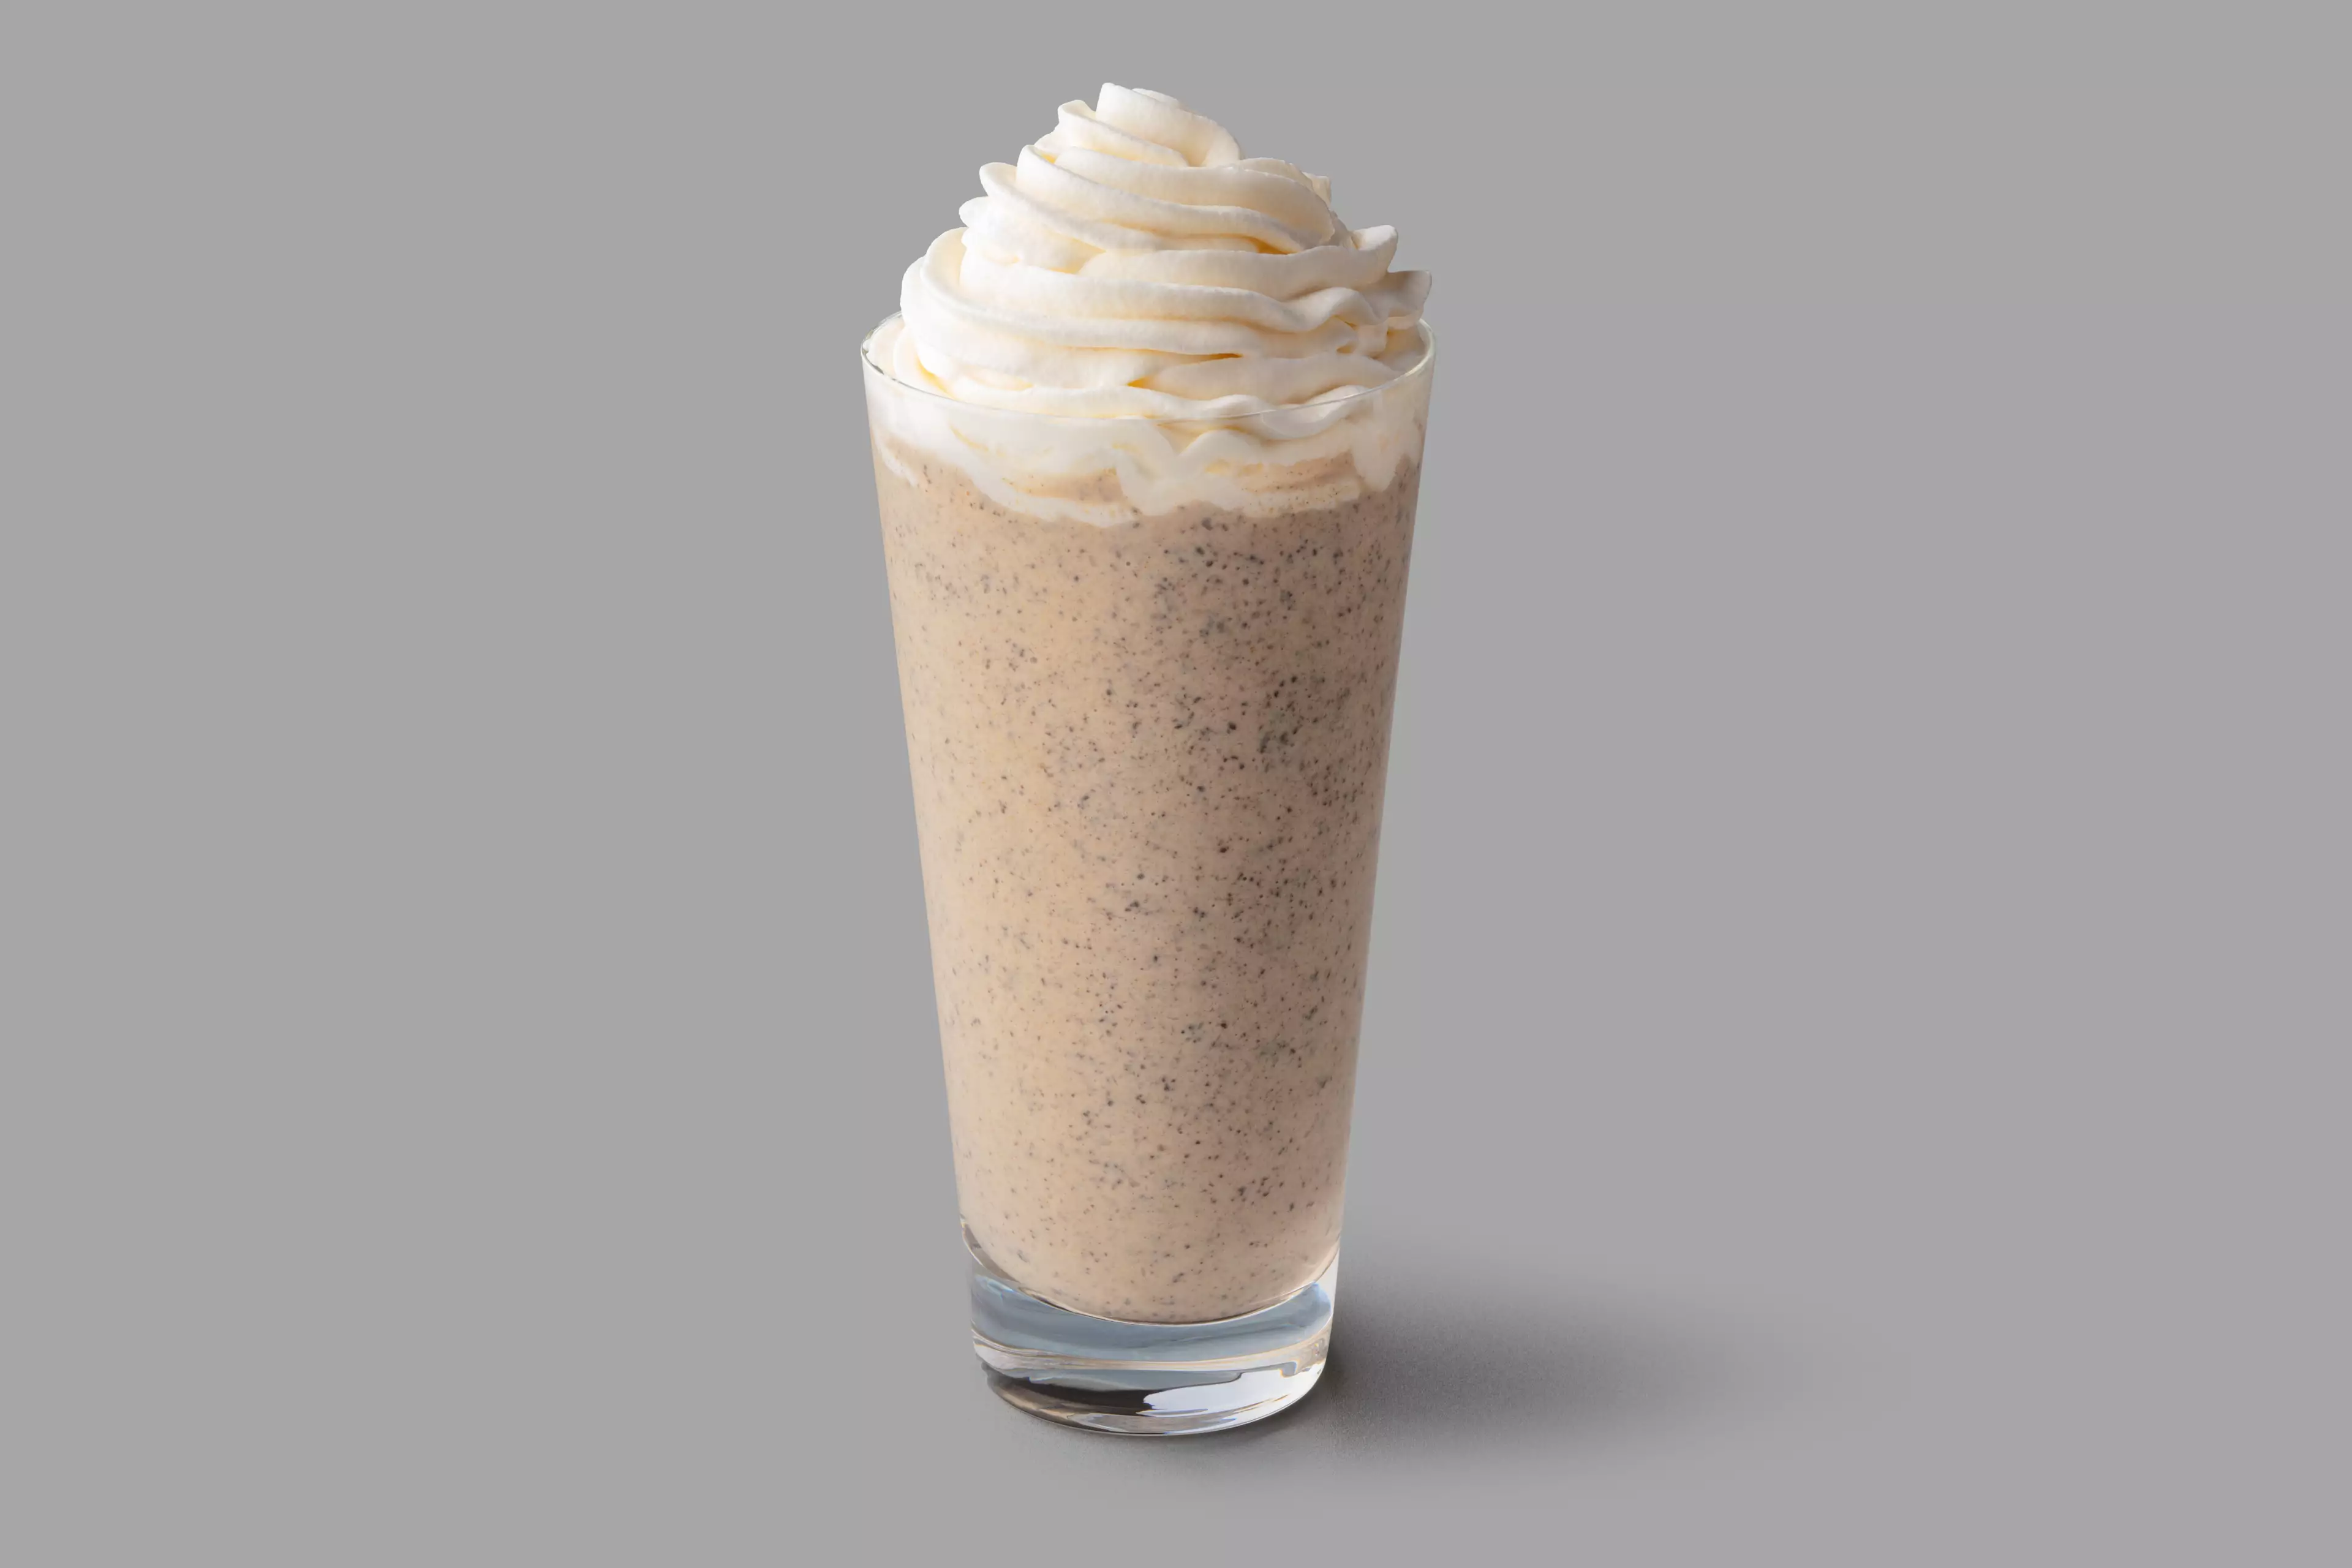 The Peanut Butter Frappu is an icy-cold blend of peanut butter flavoured sauce and chocolatey java chips topped with a generous amount of whipped cream (